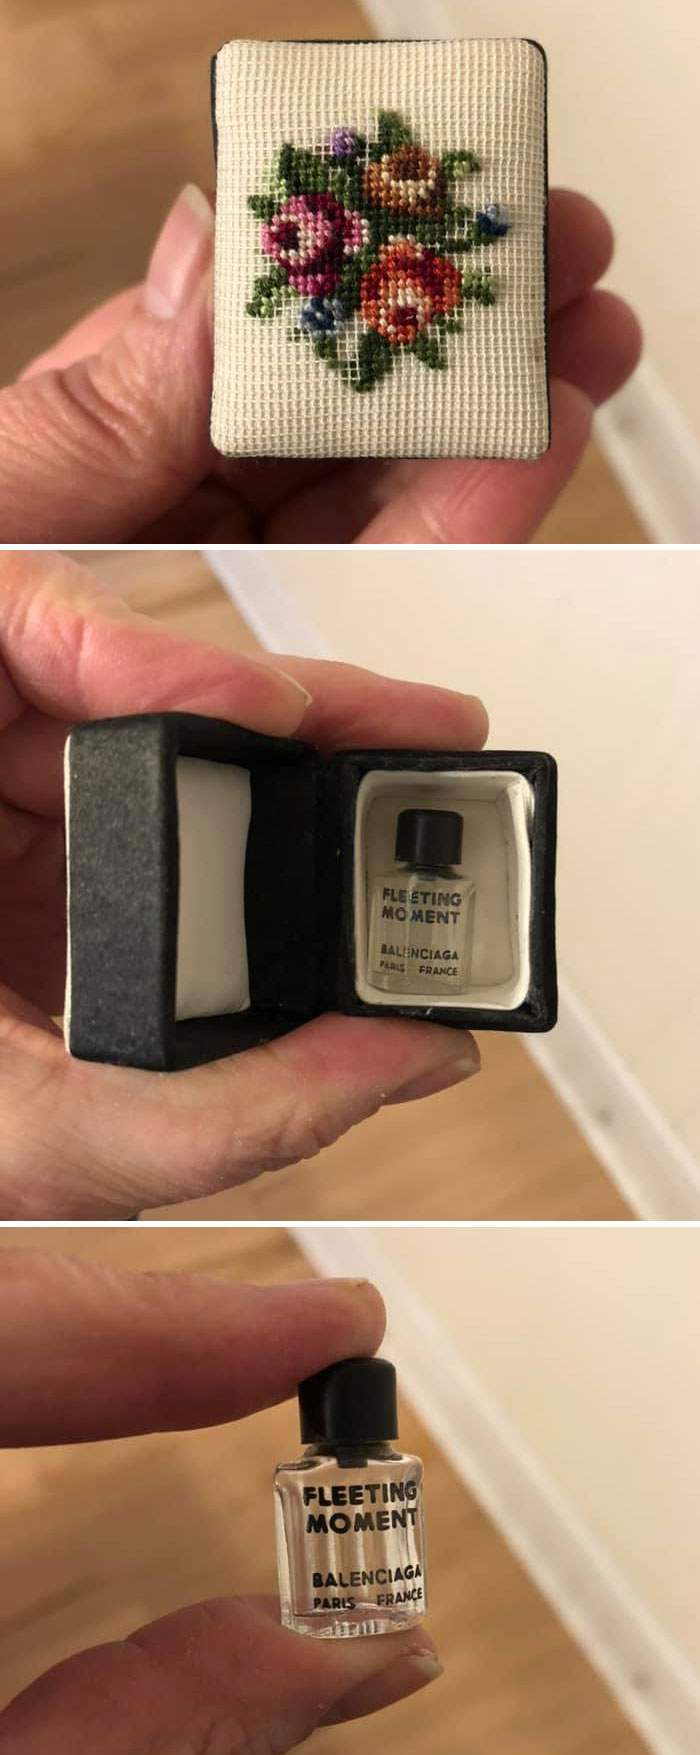 Wanted To Share My Favorite Tiny Item, A Tiny Bottle Of Perfume Called “Fleeting Moment” Inside A Tiny Box With Needle Point Lid. It Was My Grandmother’s